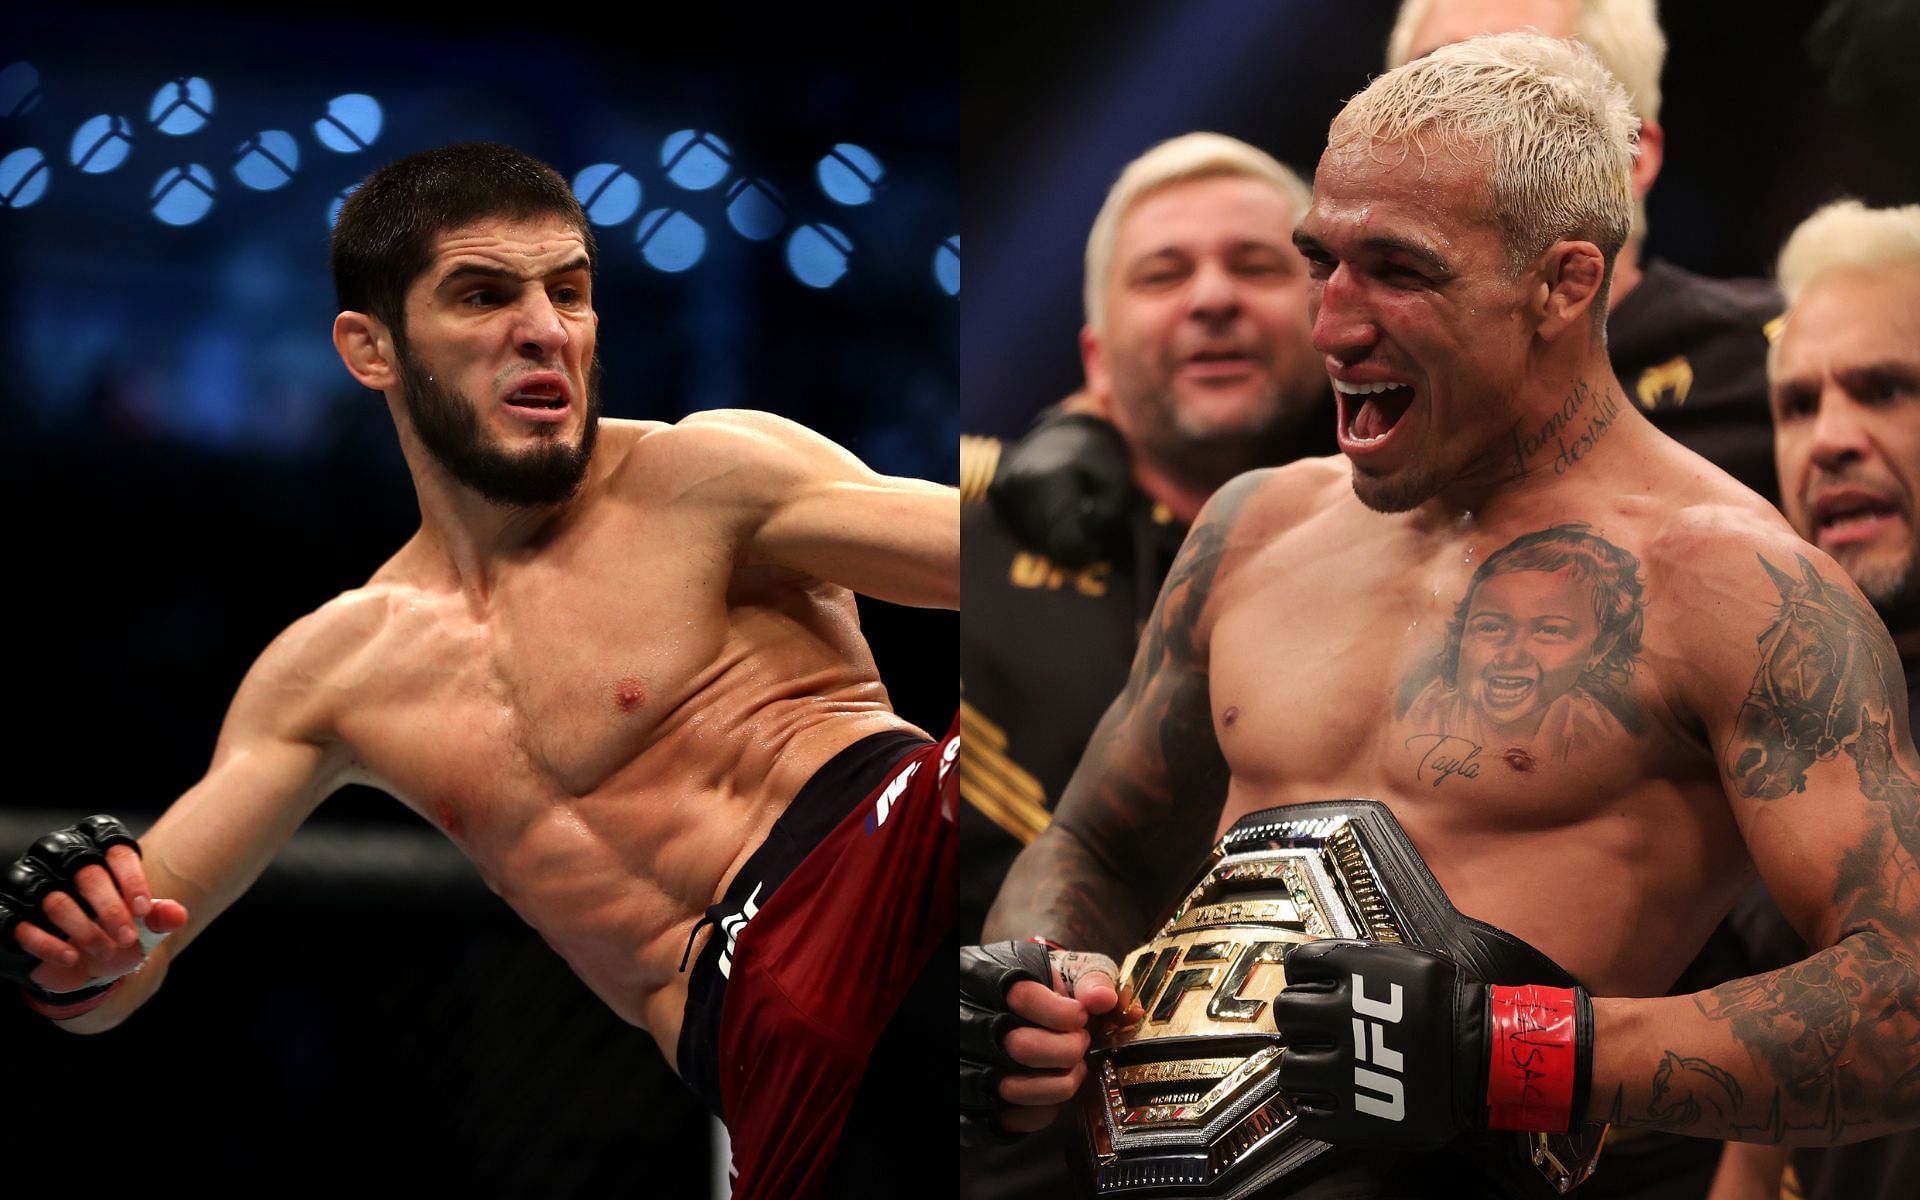 Islam Makhachev (left) needs two more wins for a title shot, according to Charles Oliveira (right)